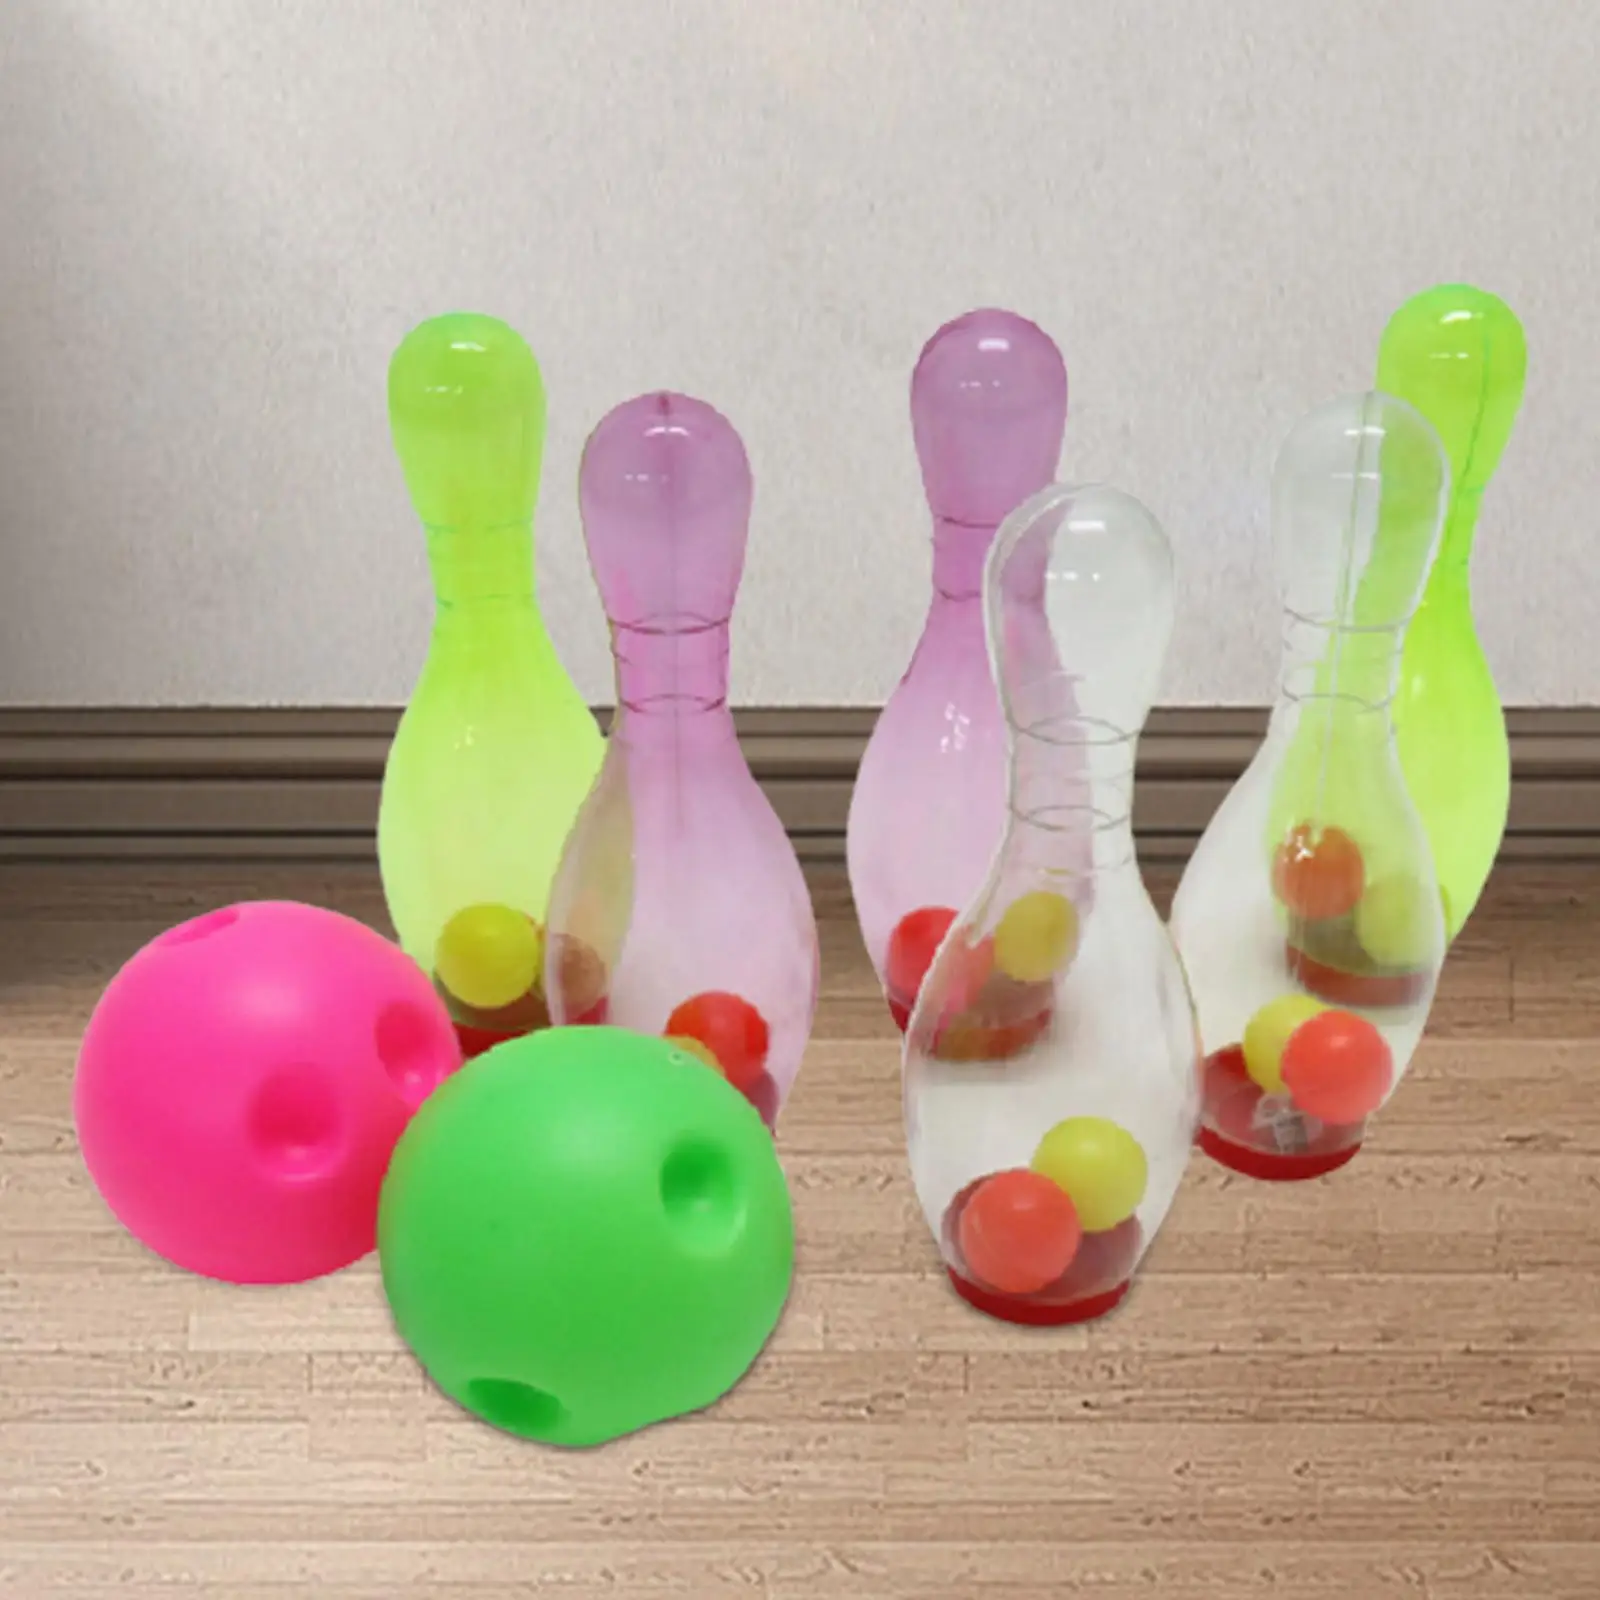 Kids Bowling Play Set Light up Development Toy LED Bowling Pins for Kids